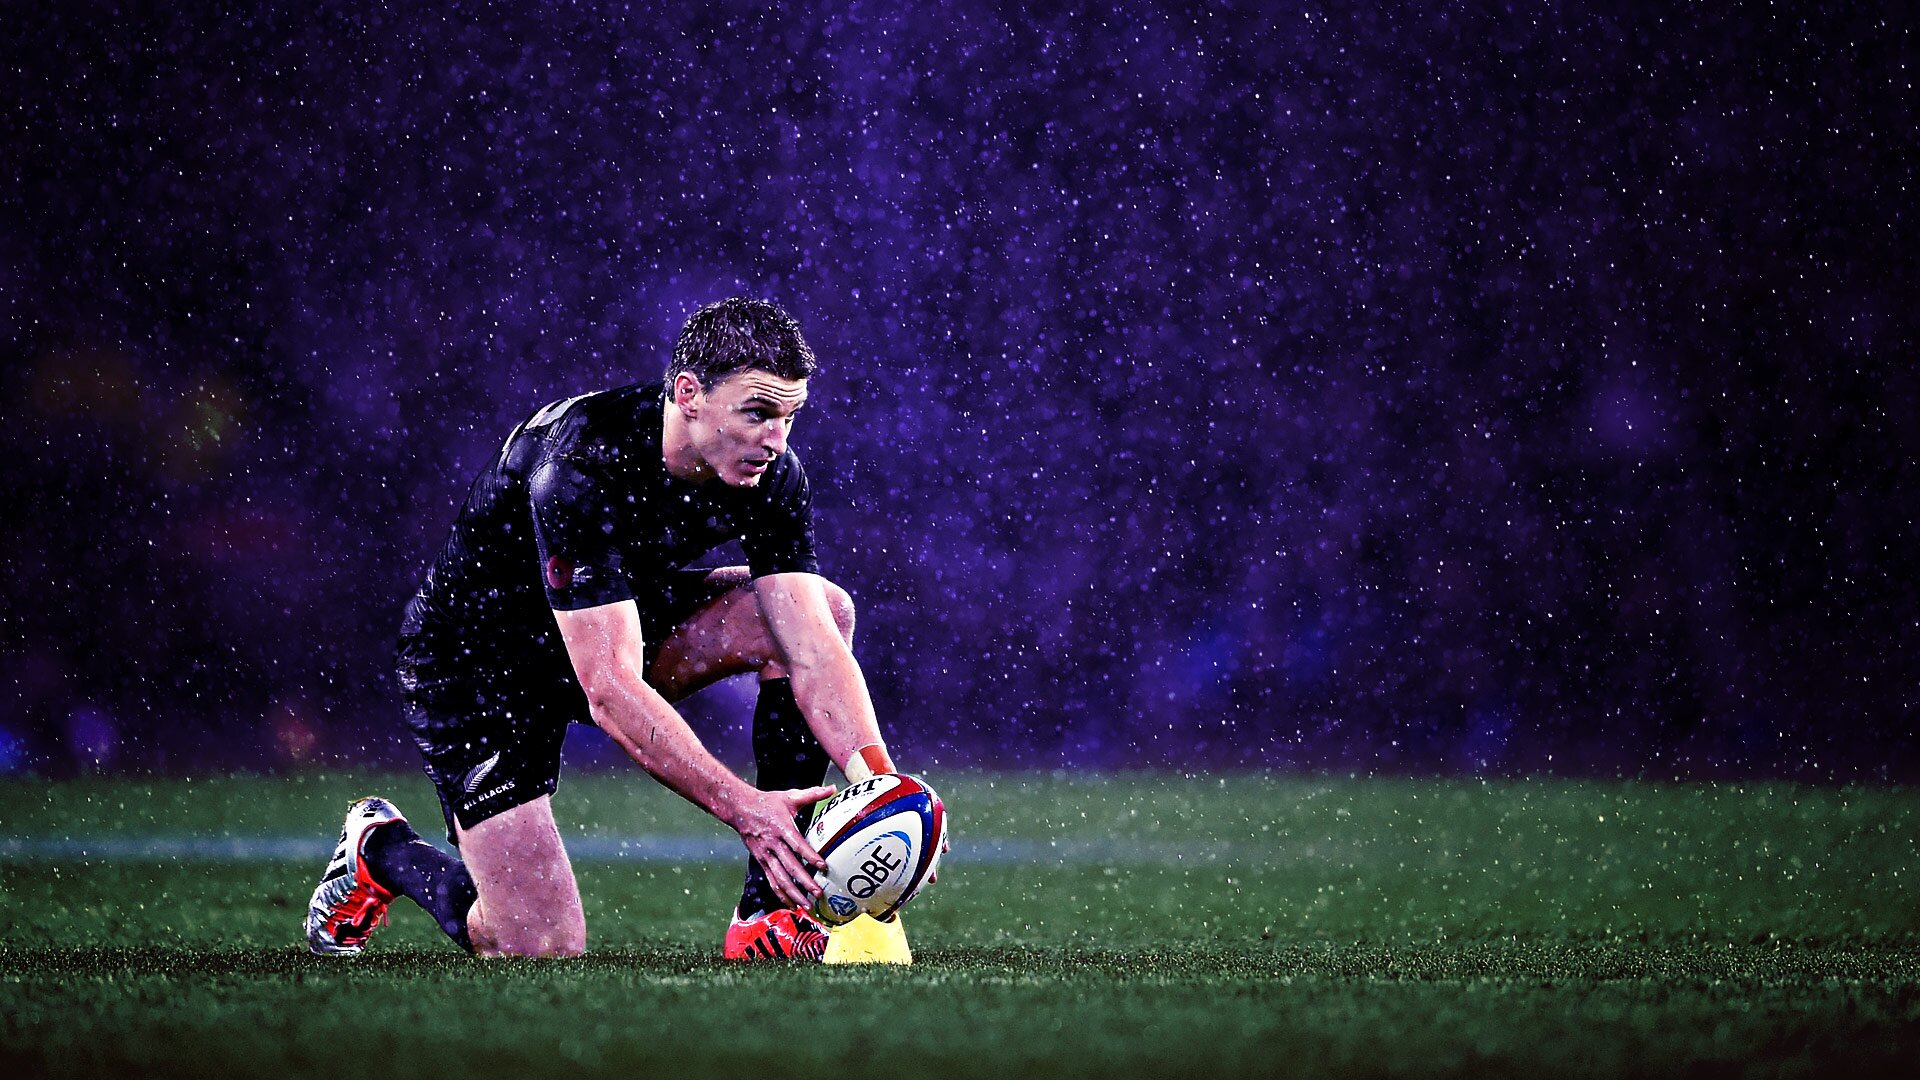 An inconvenient truth - The astounding difference in Beauden Barrett's goal kicking percentage based on ball brand